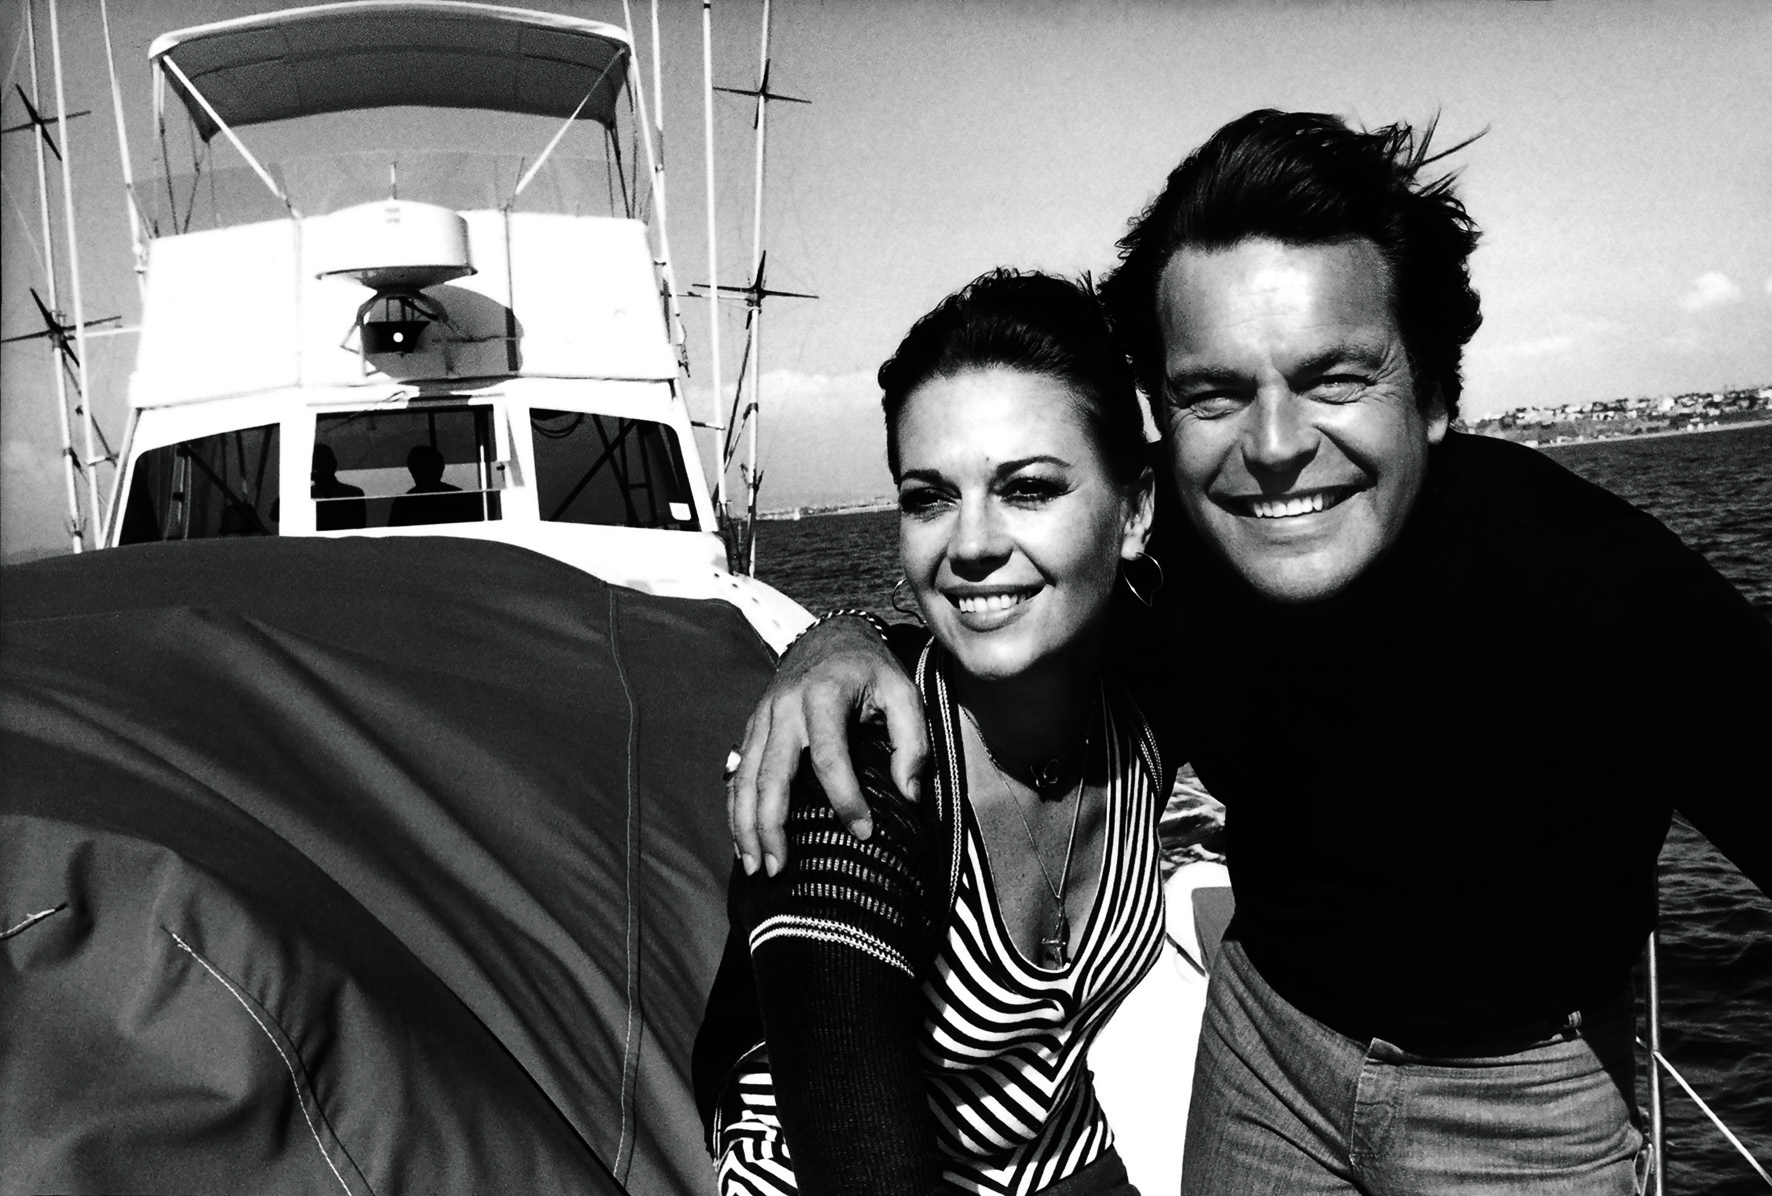   © The Stylish Life - Yachting, published by teNeues, www.teneues.com. Natalie Wood and Robert Wagner, Photo © Steve Schapiro/Corbis.  